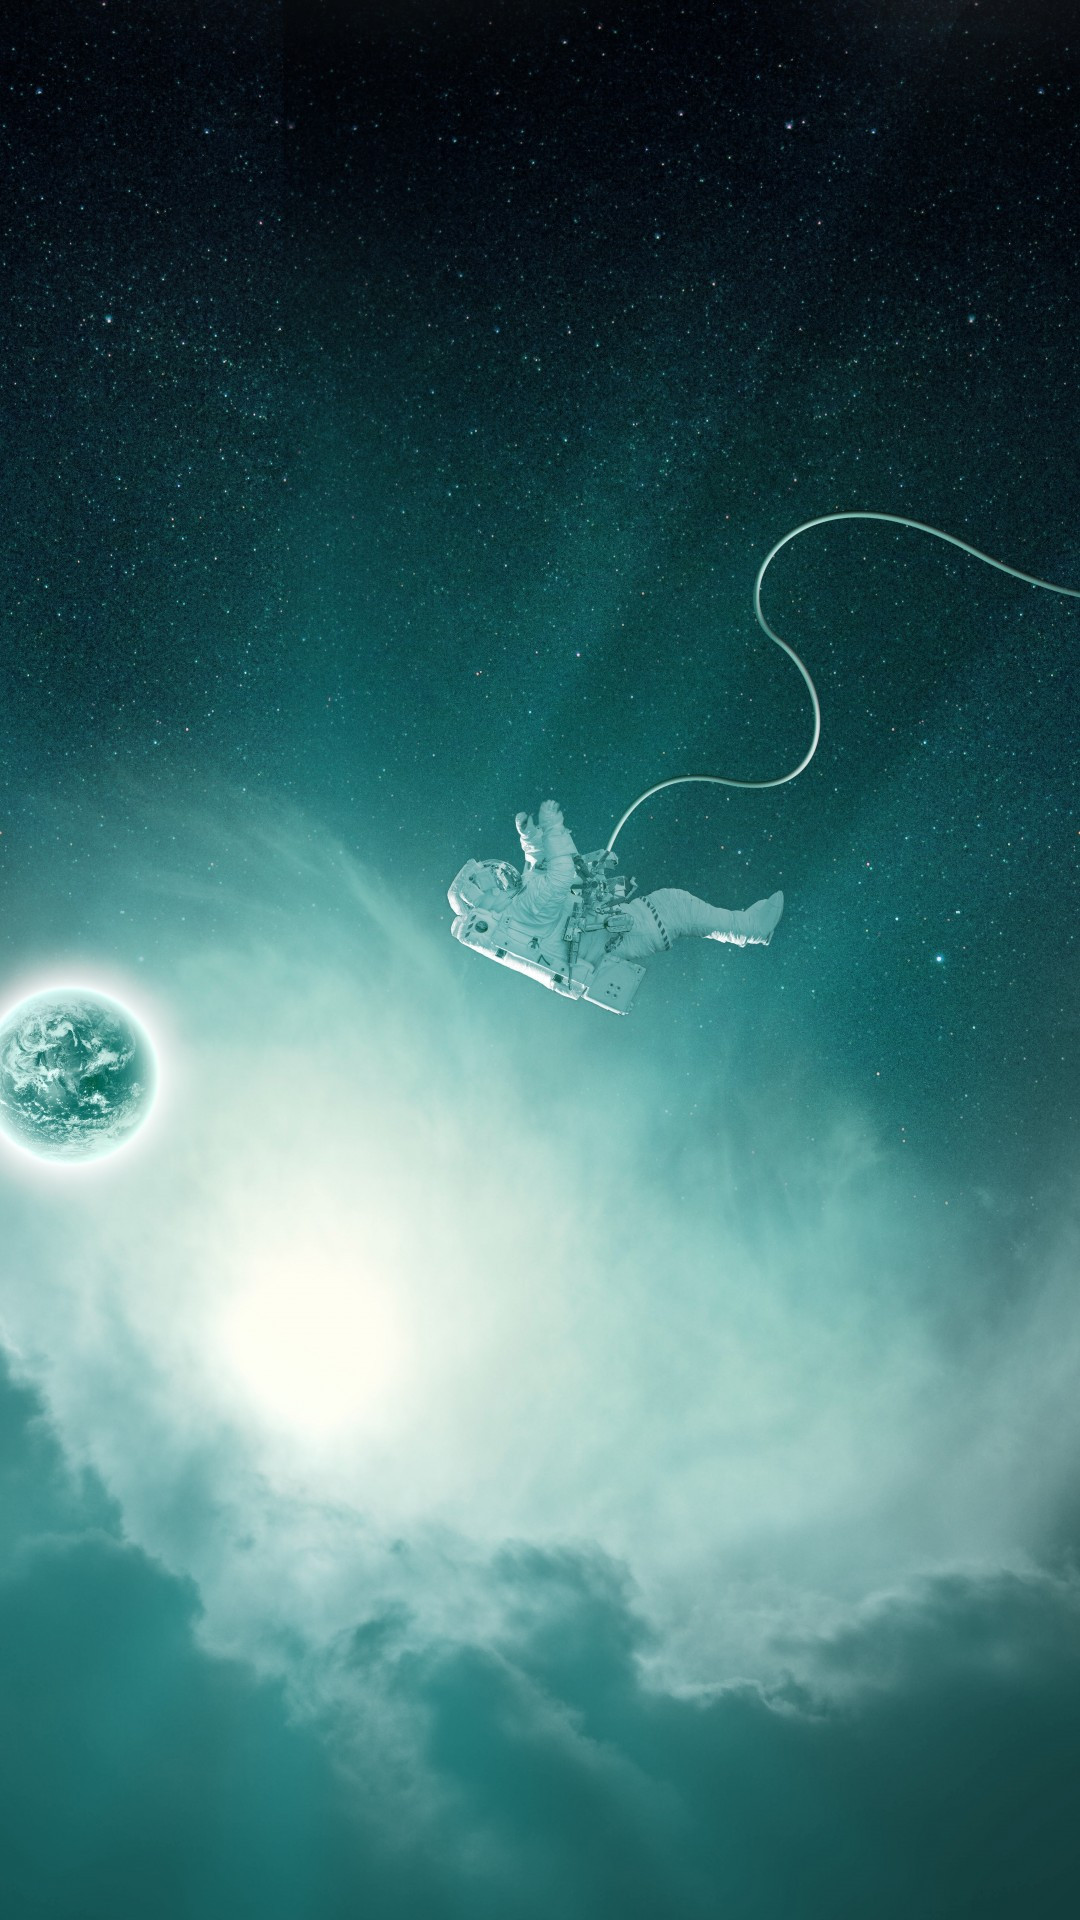 Astronaut Falling In Black Hole Wallpapers